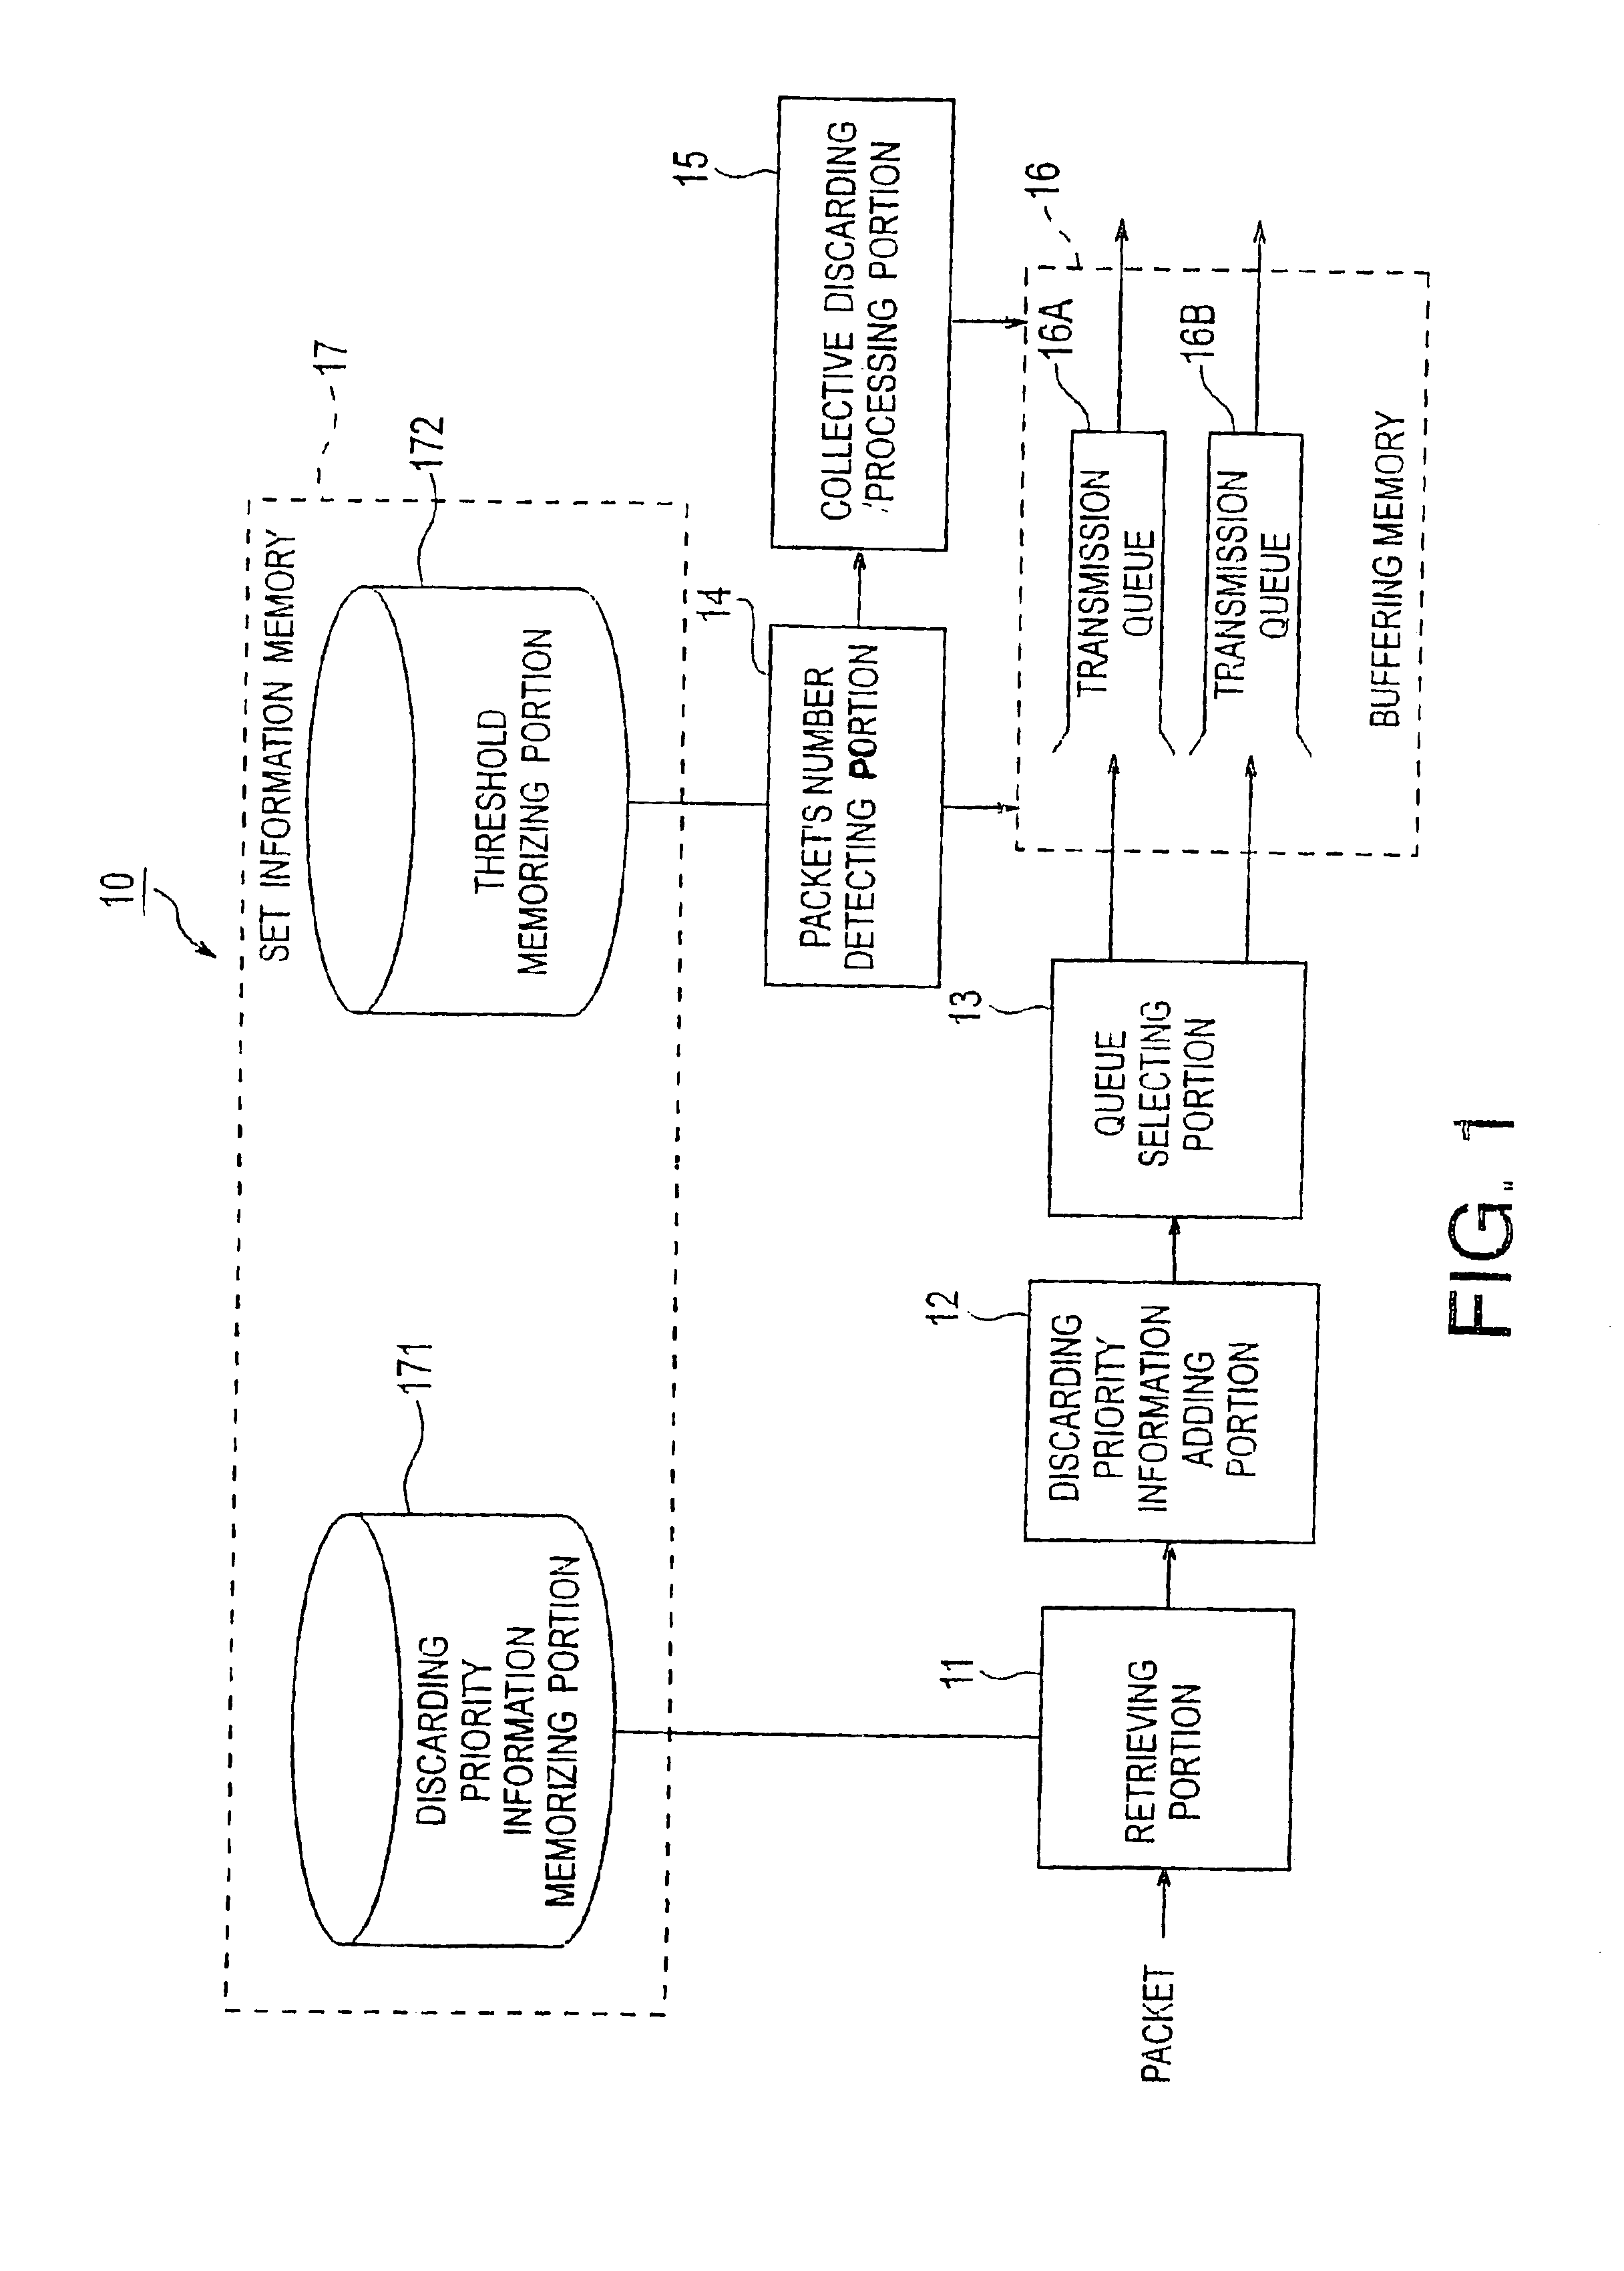 Transmission queue managing system capable of efficiently controlling traffic congestion